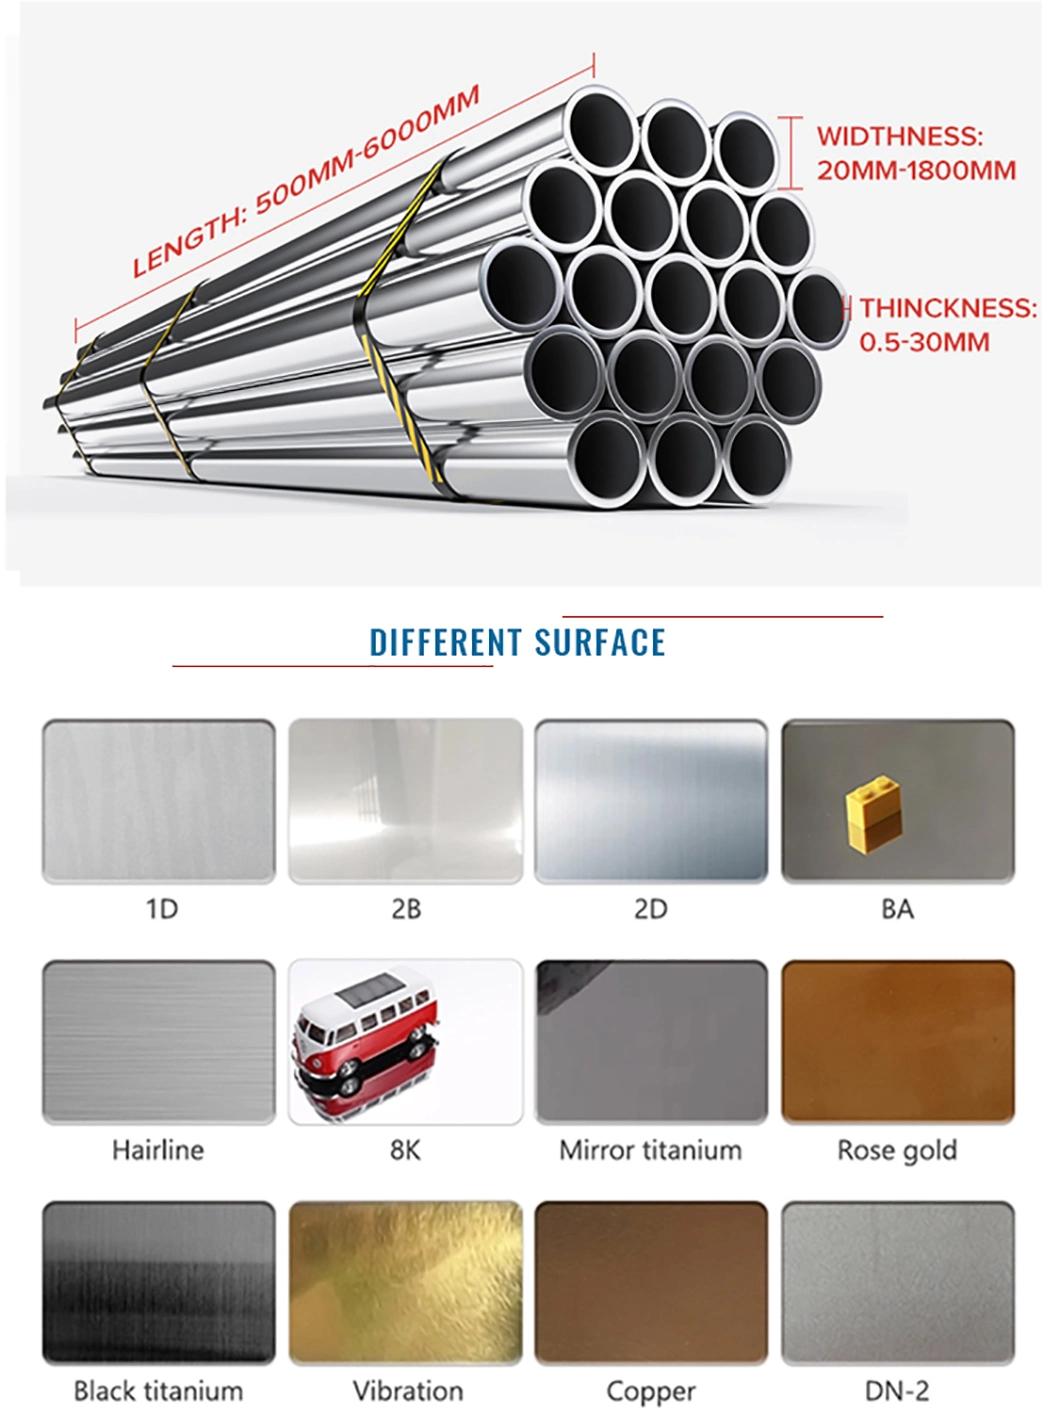 Professionlly Supply AISI 321/CT12X18h10t Welded Stainless Steel Tube Pipe for Russia